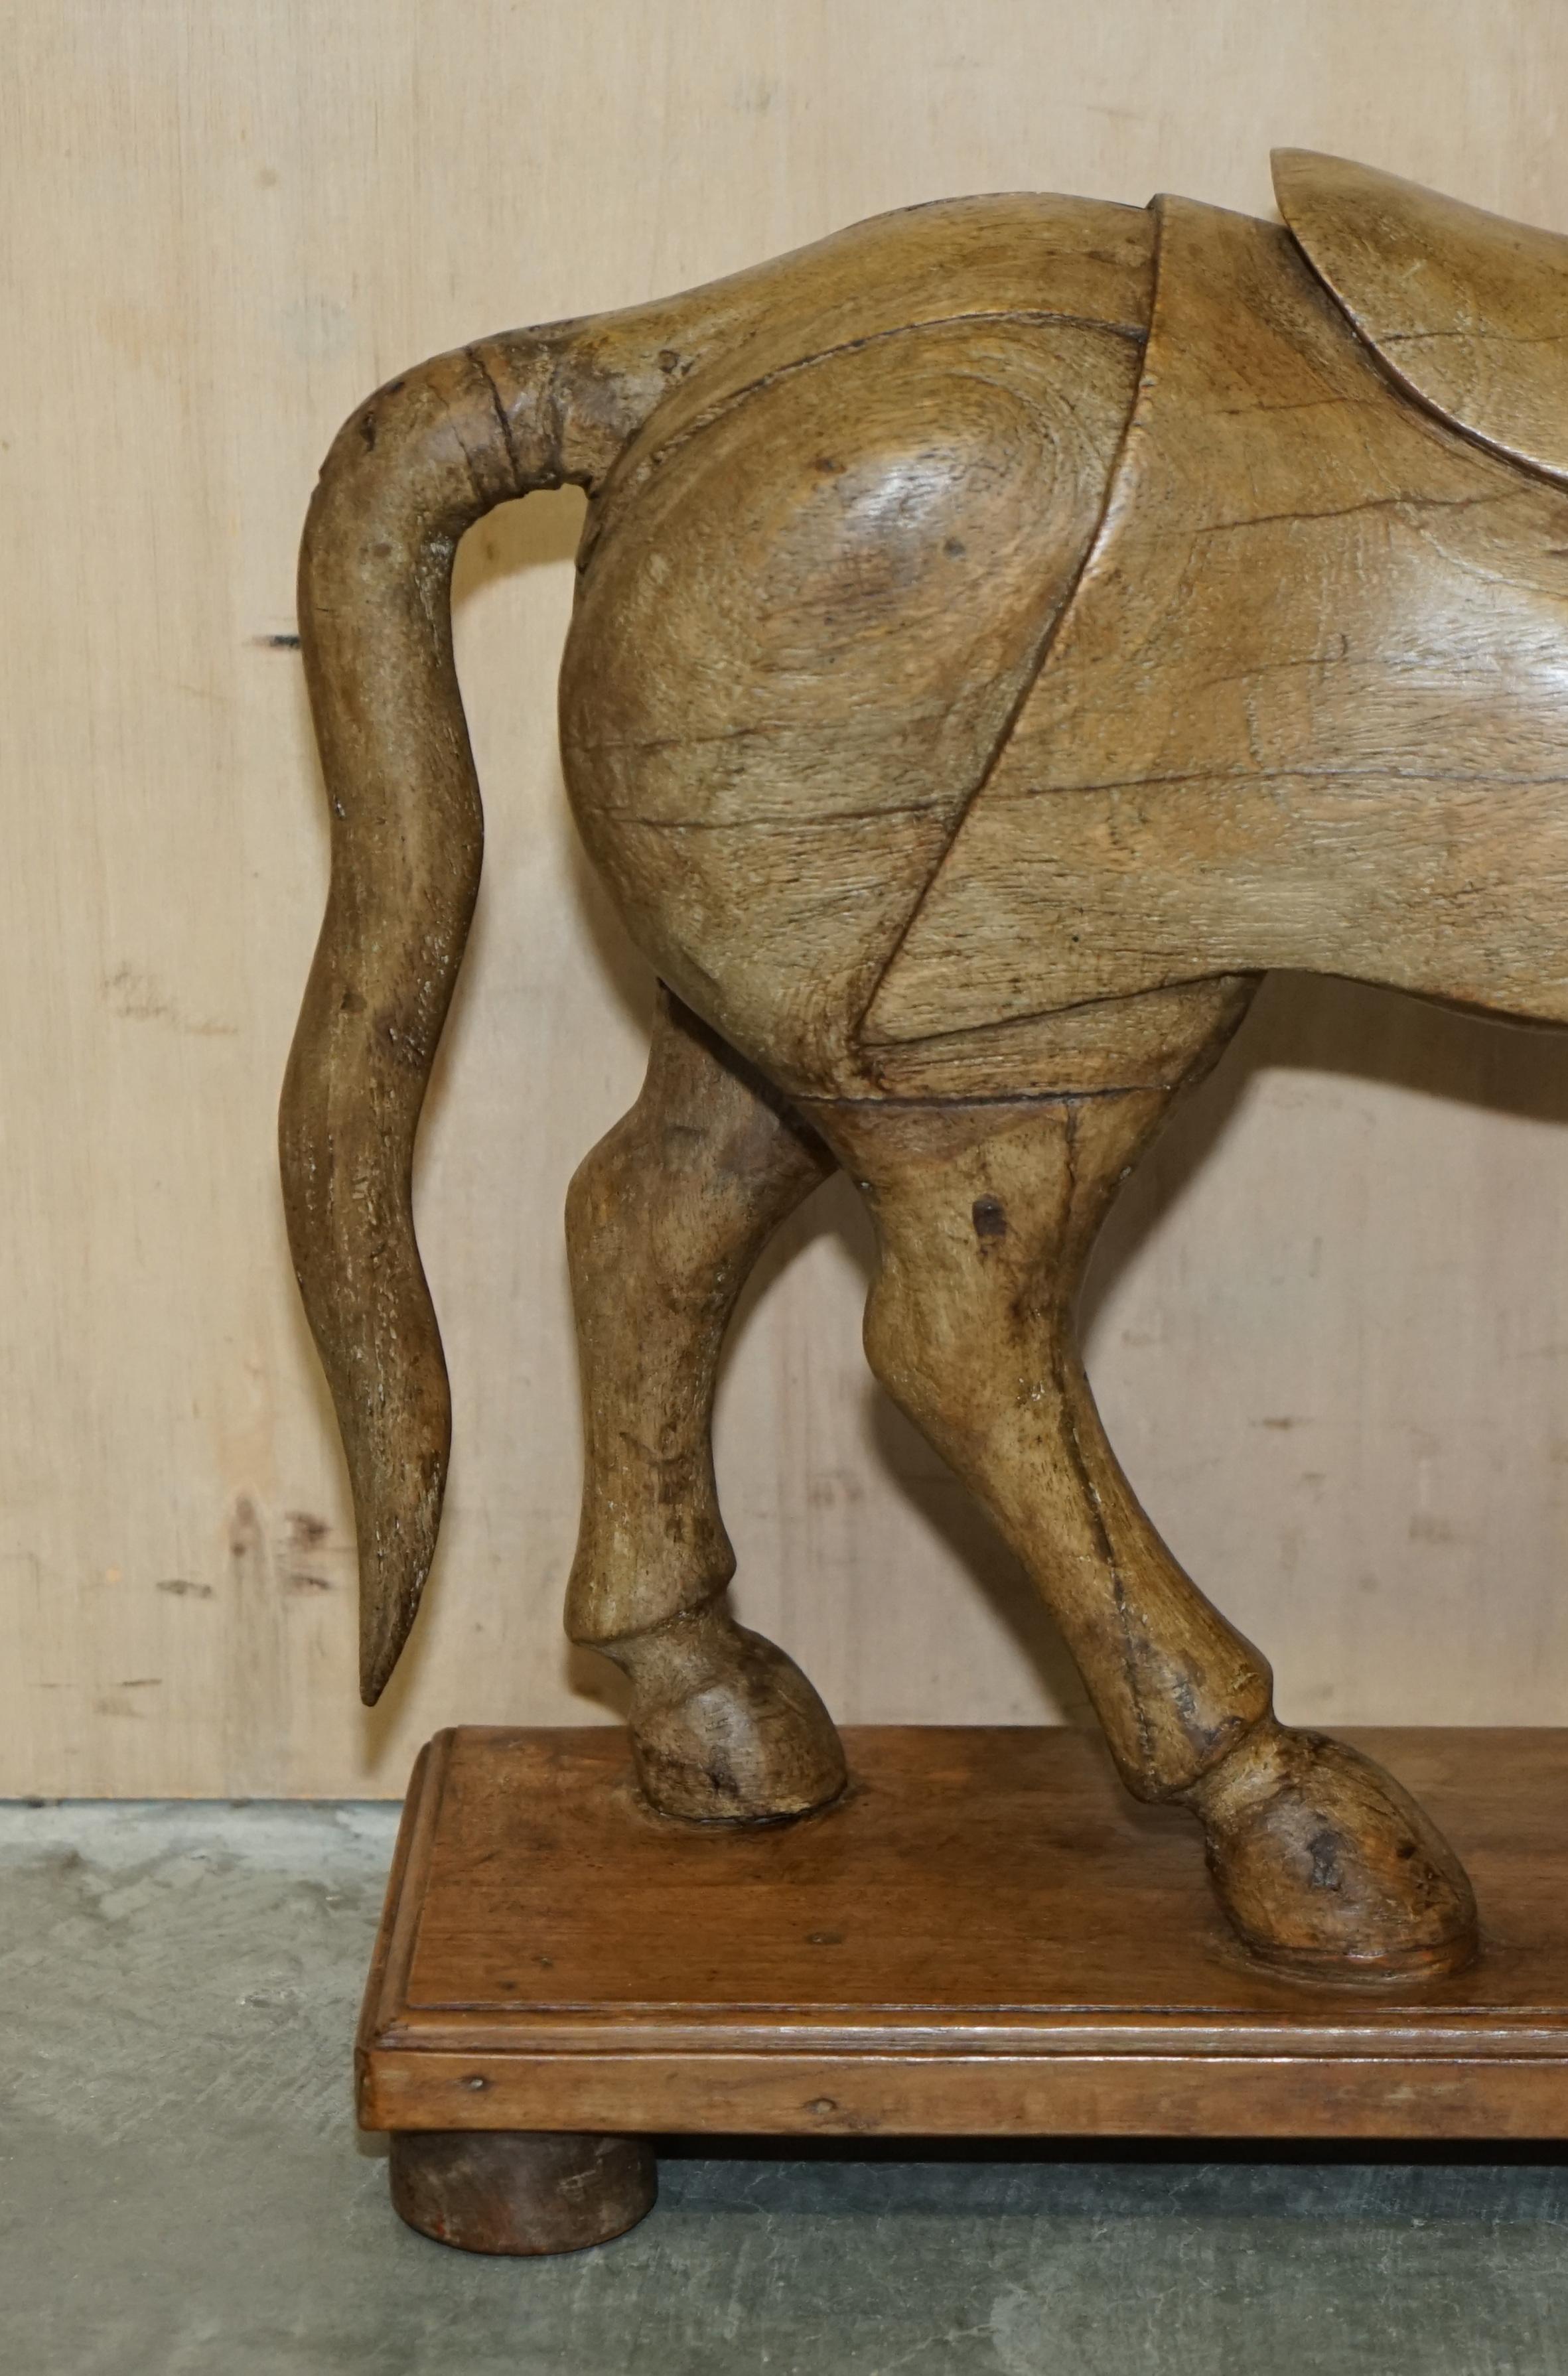 PAiR OF DECORATIVE ANTIQUE HAND CARved WOODEN STATUES OF A LOVELY HORSES im Angebot 1